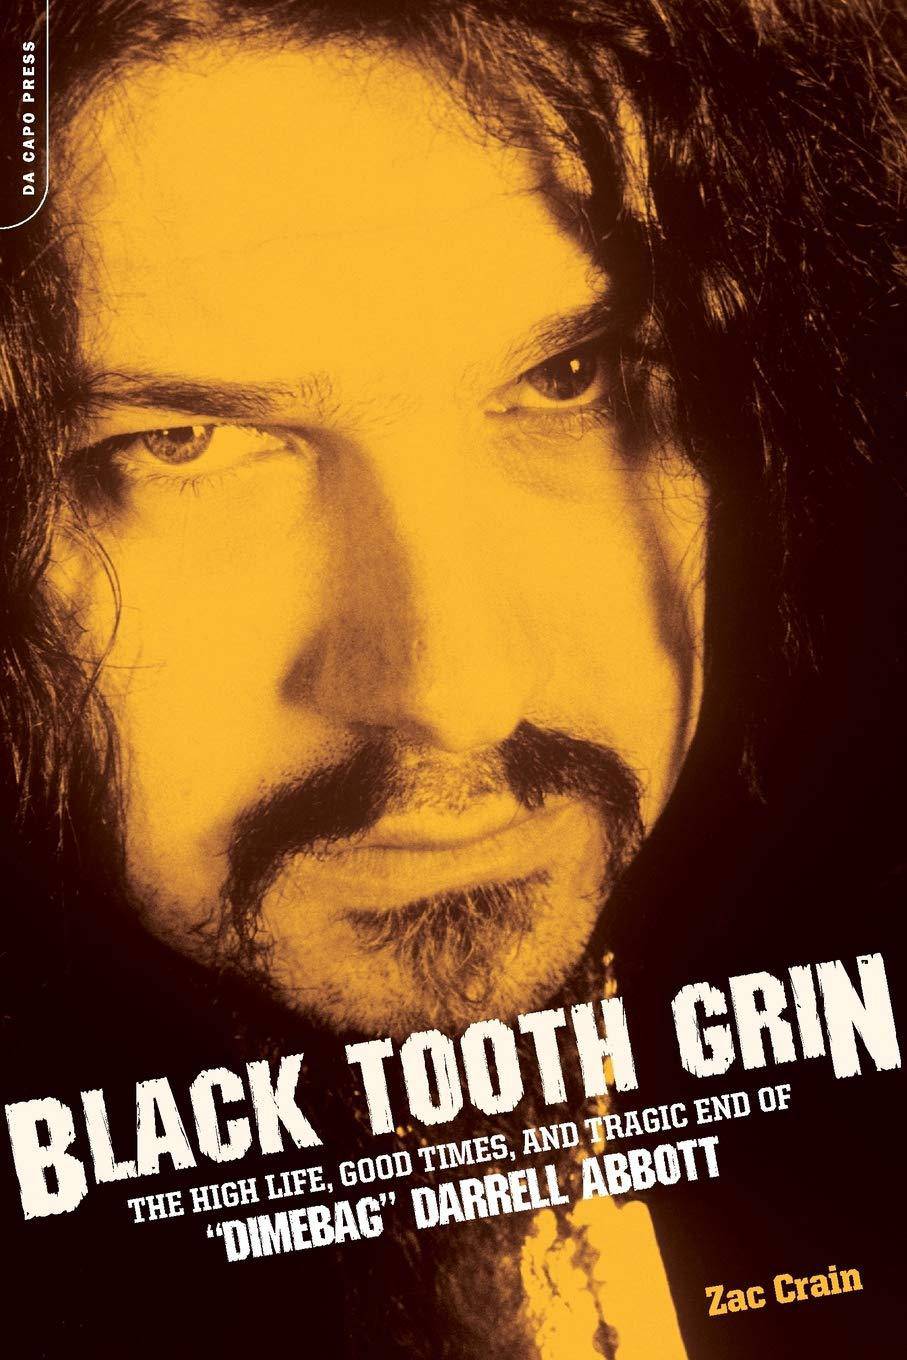 Black Tooth Grin: The High Life, Good Times, and Tragic End of D - SureShot Books Publishing LLC